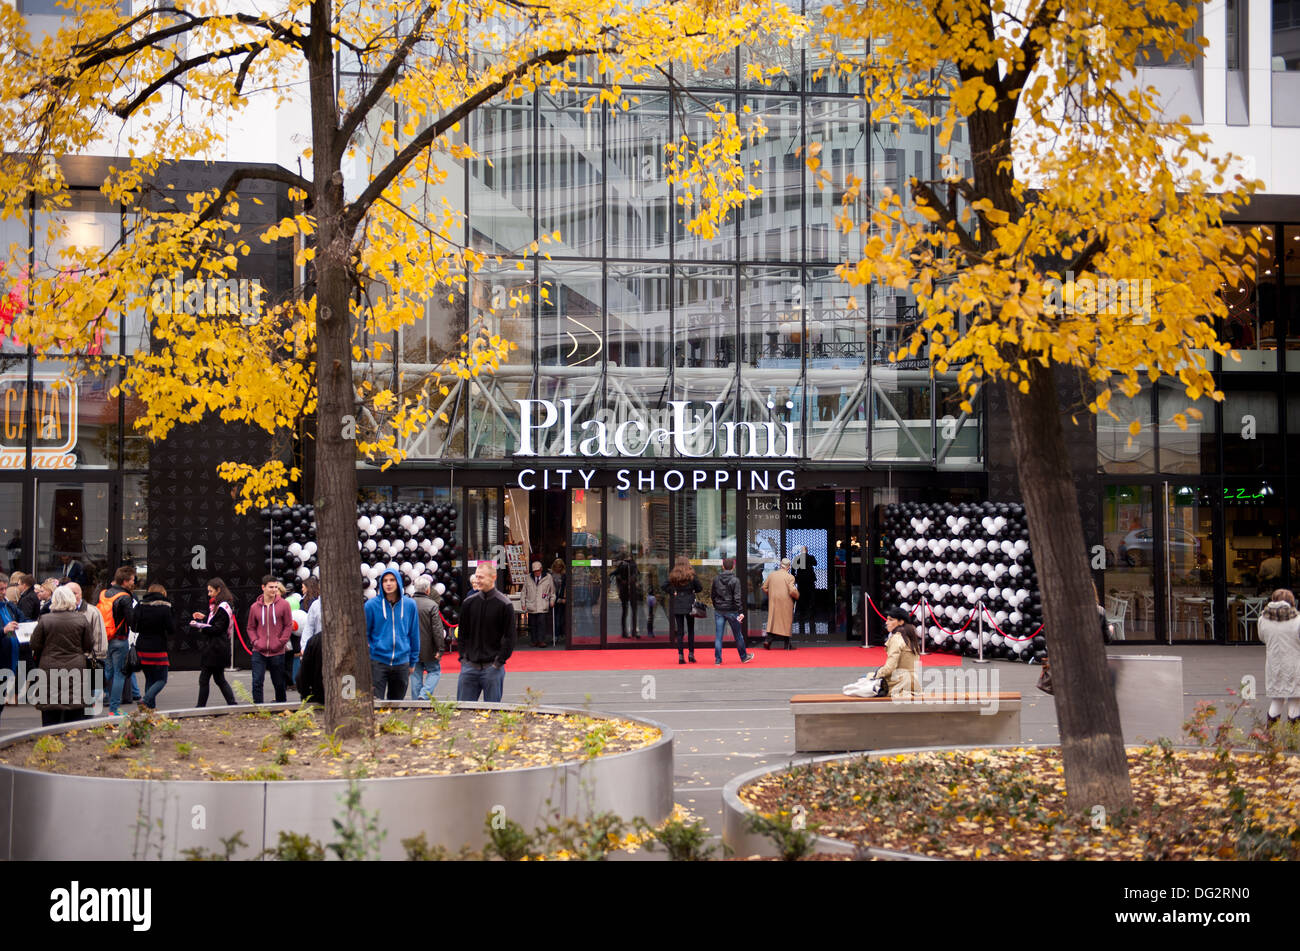 2013.10.12, big opening City Shopping at Plac Unii Lubelskiej (Union of Lublin Square), Warsaw Stock Photo